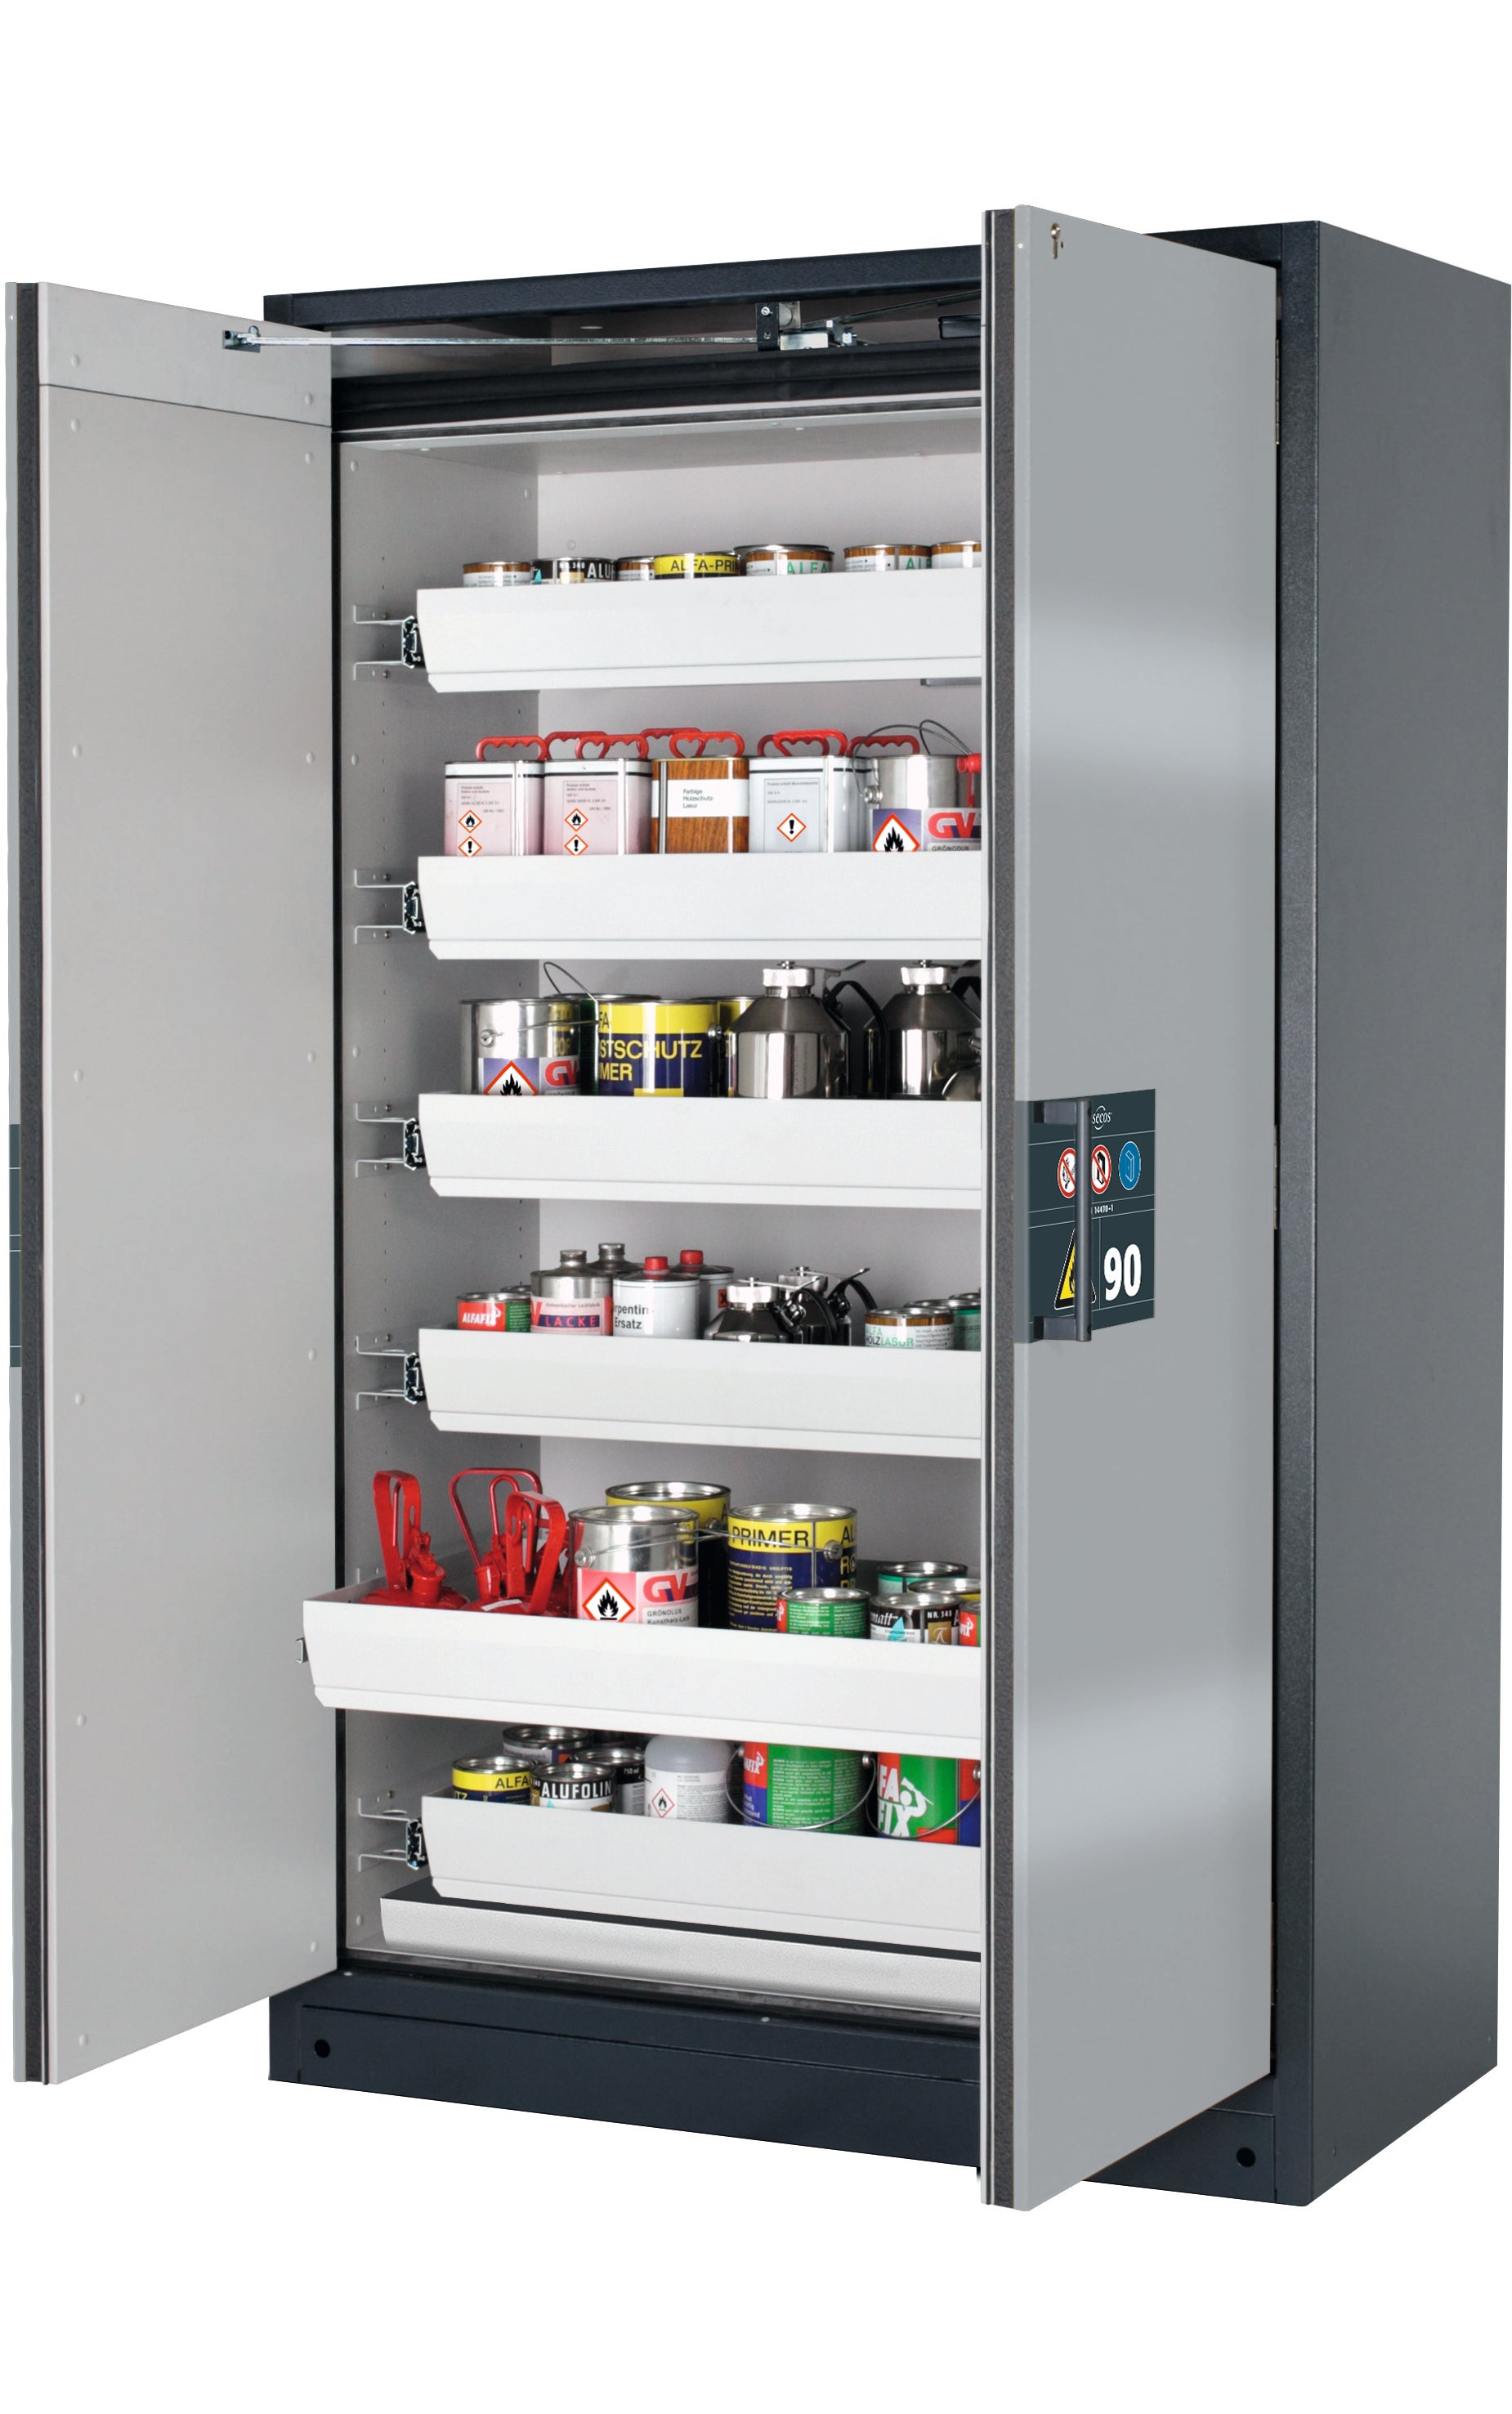 Type 90 safety storage cabinet Q-PEGASUS-90 model Q90.195.120.WDAC in asecos silver with 6x drawer (standard) (sheet steel),